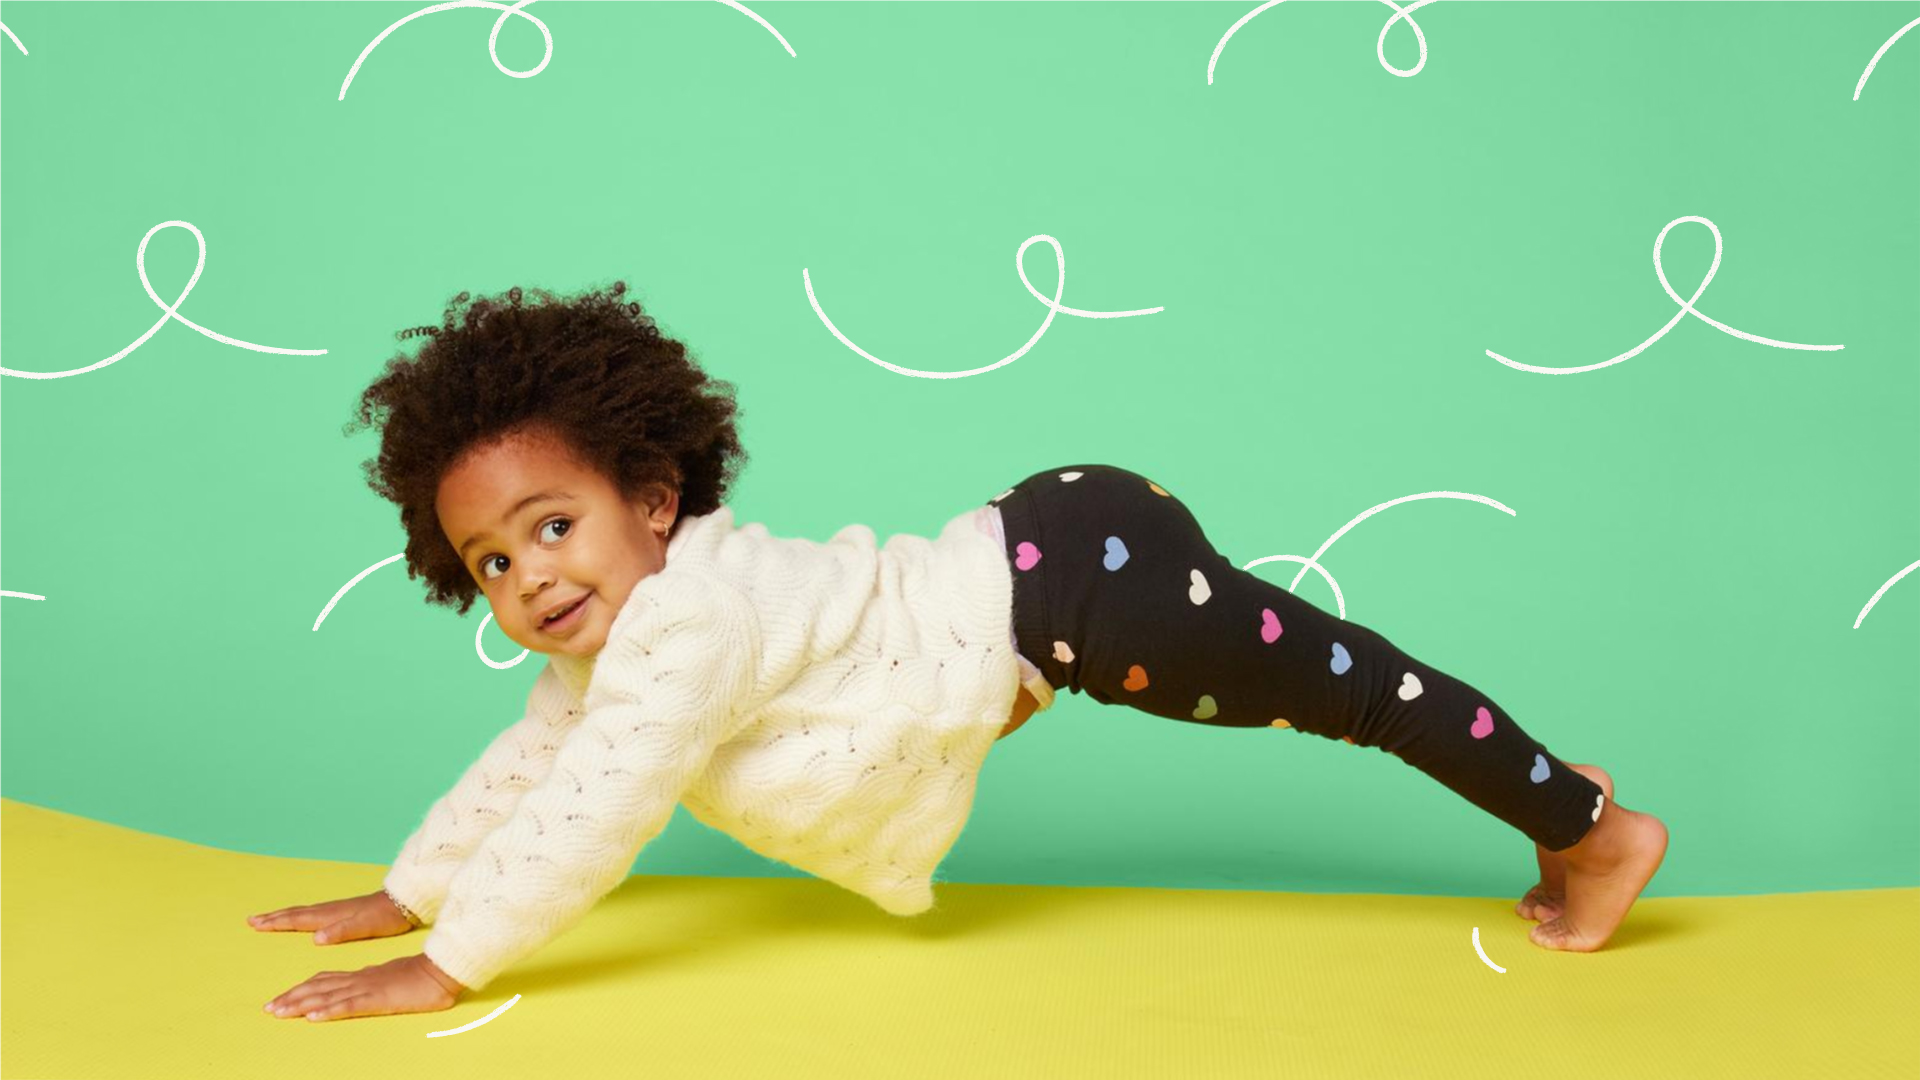 Kids Bedtime Yoga: Why it Works, Tips to Develop a Practice, and Poses to Try